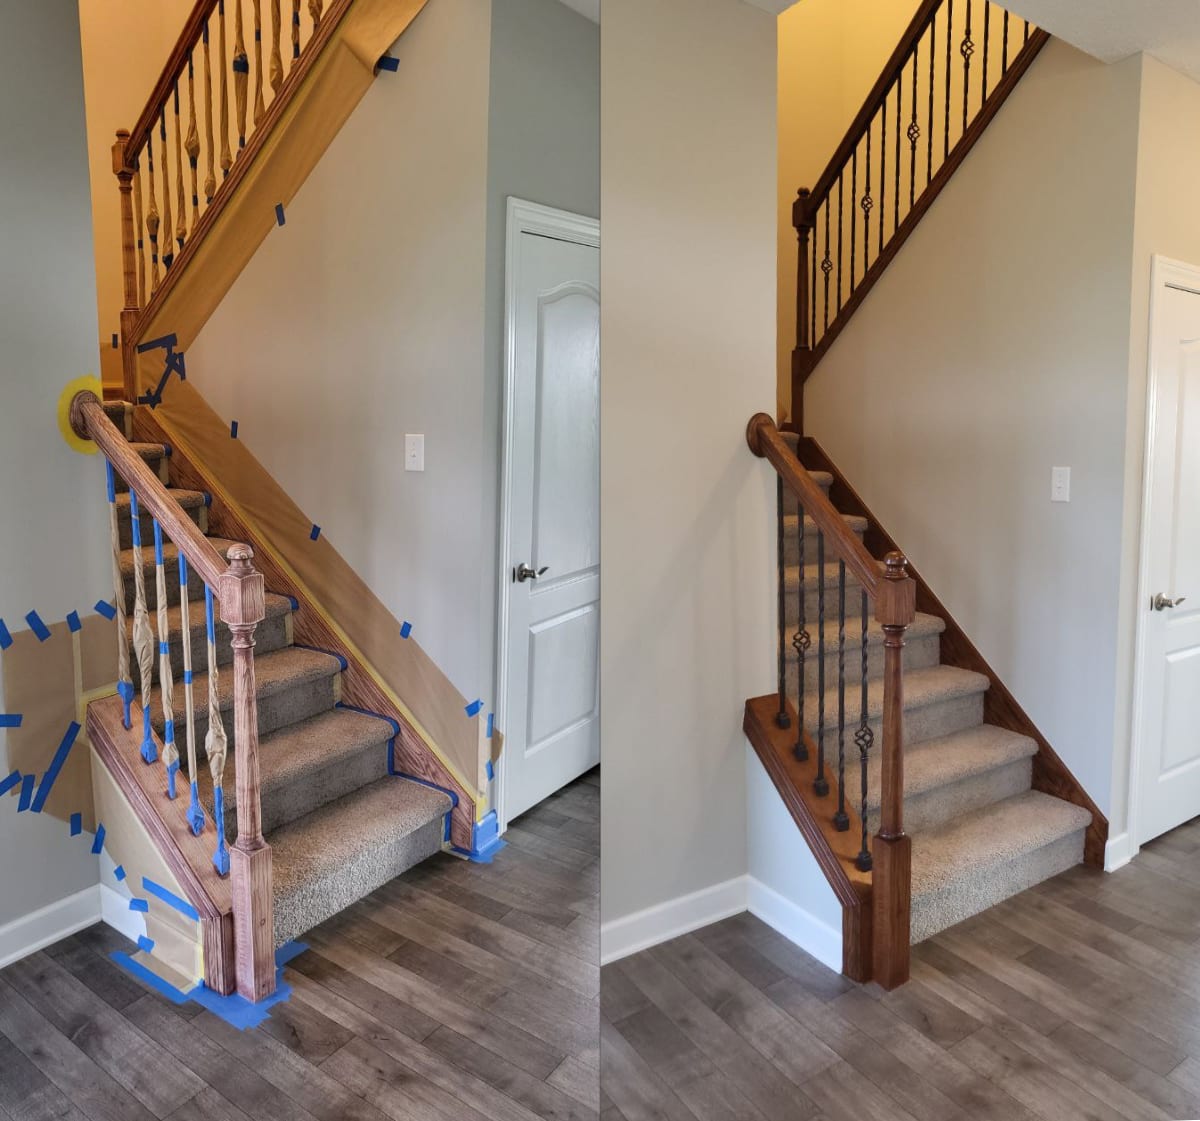 before picture of stairs at bottom with painters tape and cardboard prepped and after picture of beautiful dark stain